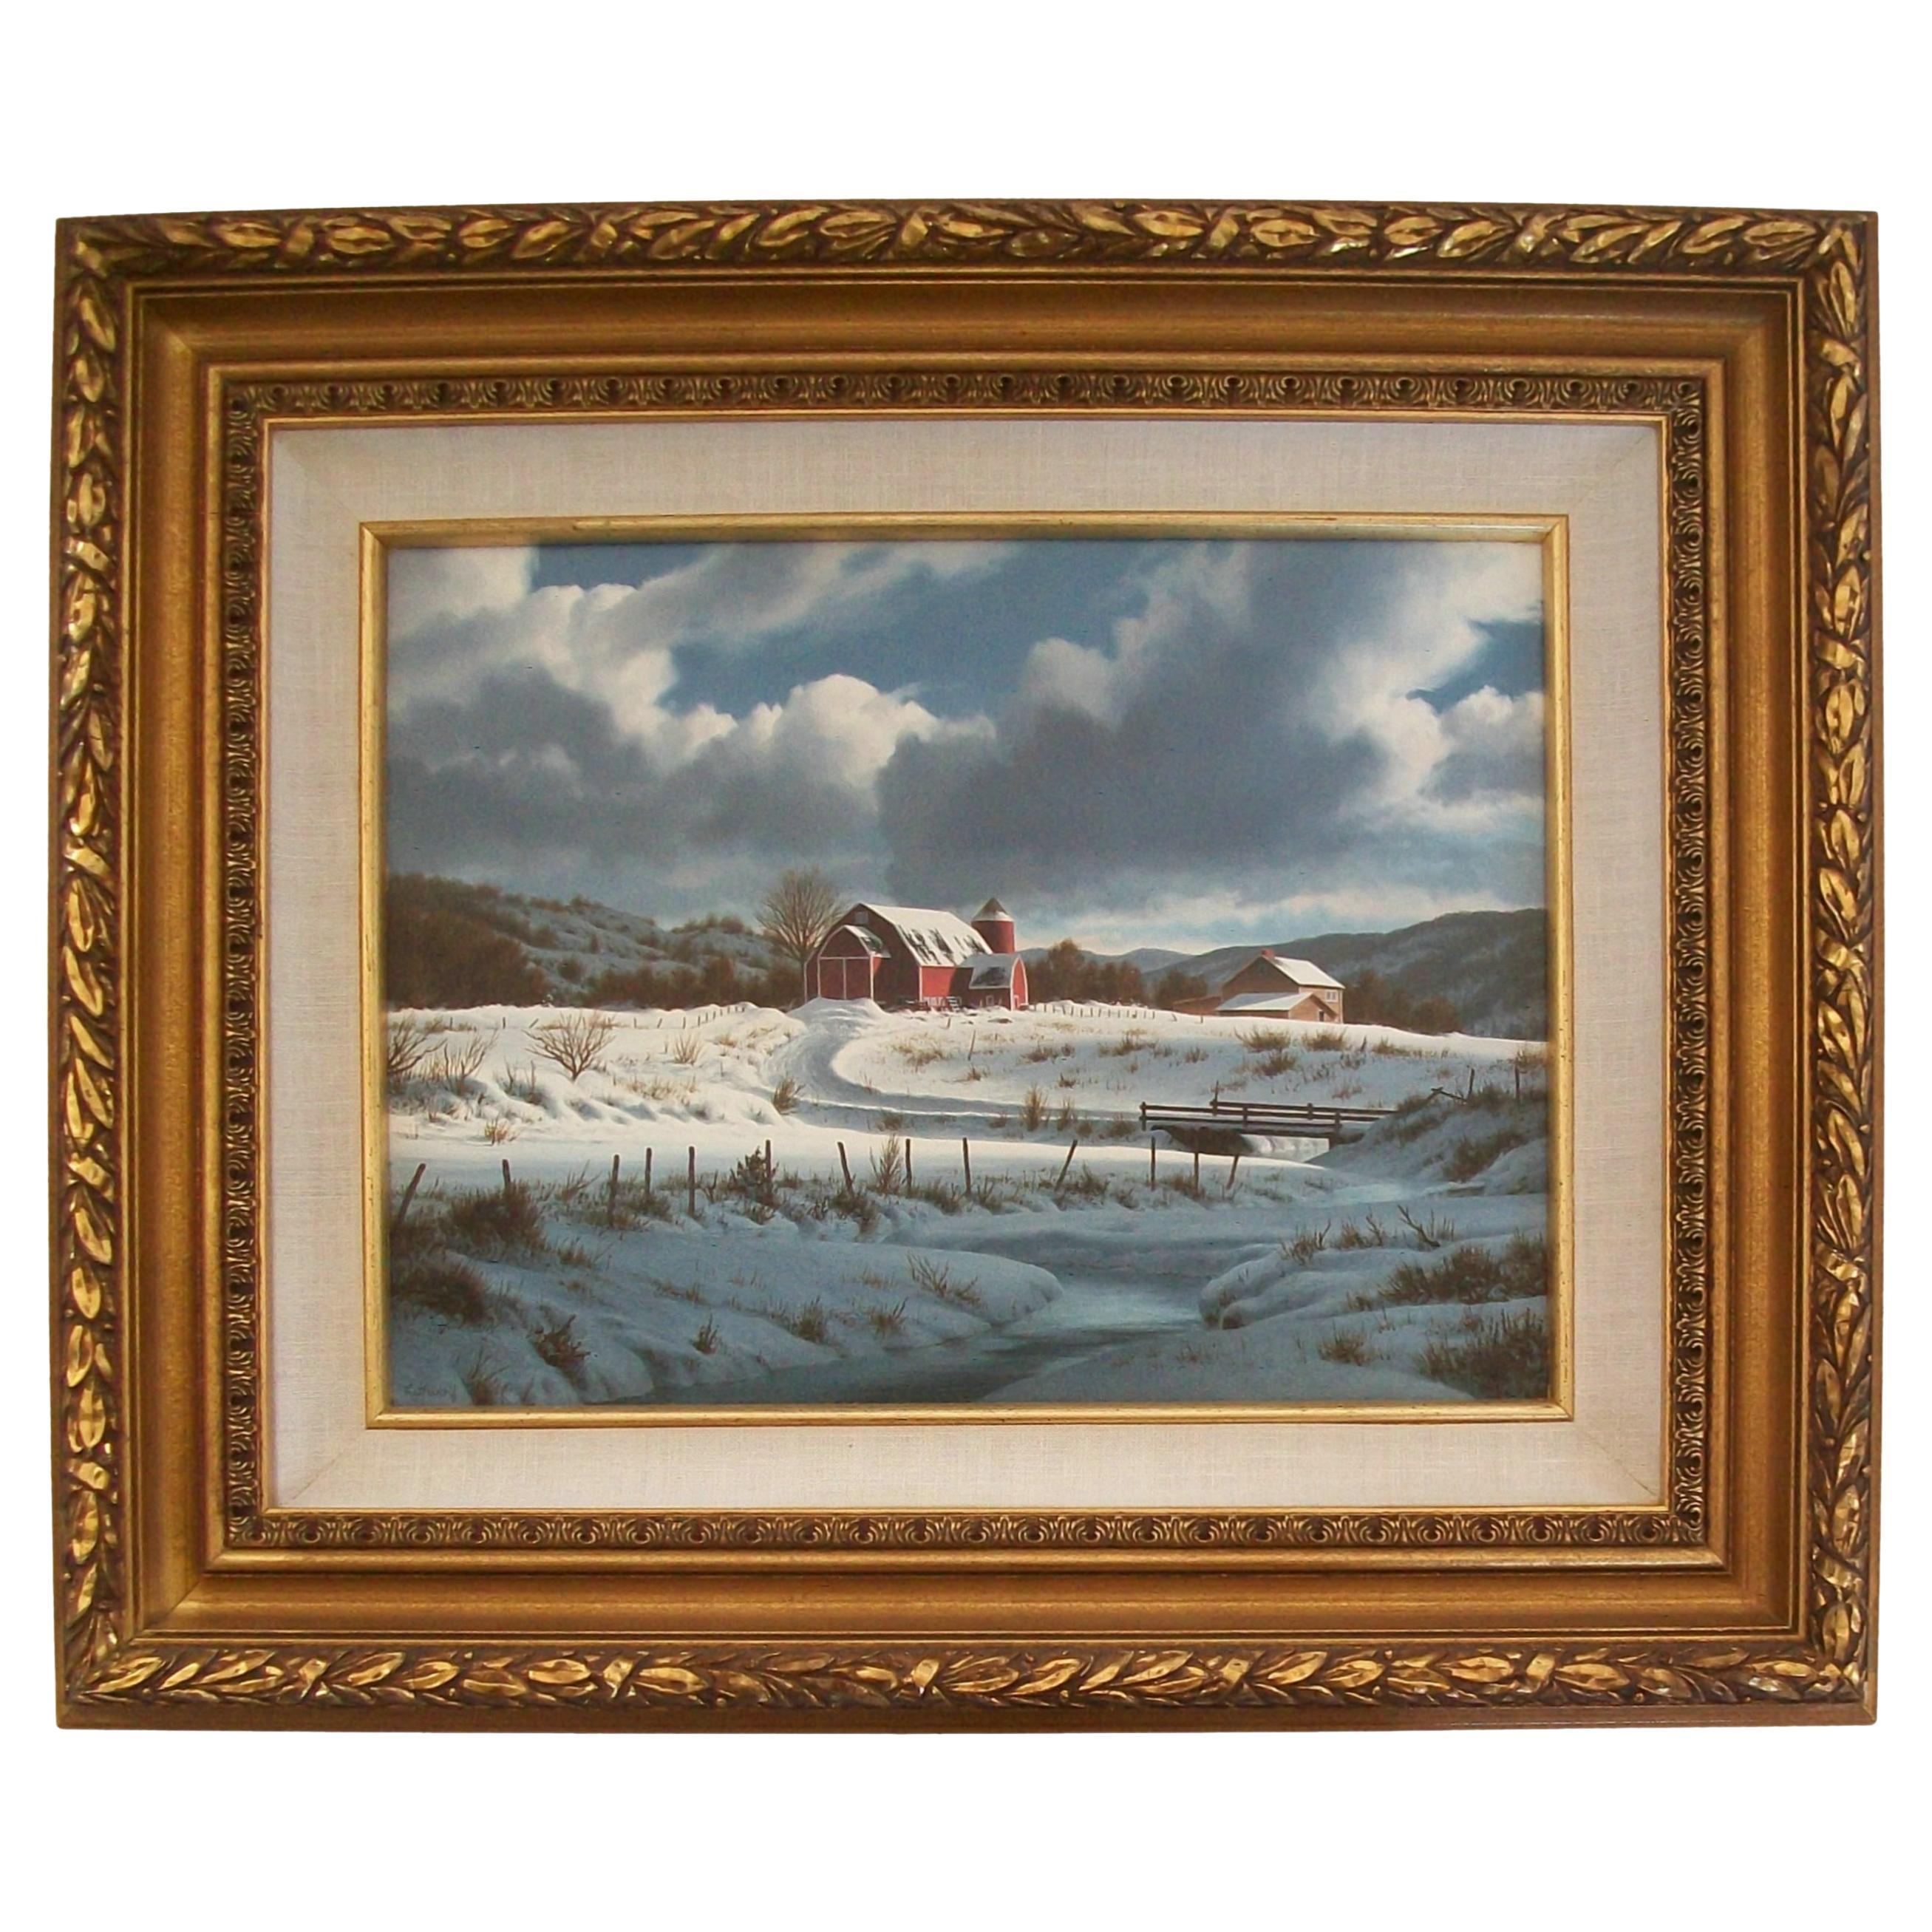 James A. Fetherolf, "Memories", Framed Oil Painting, U.S., Late 20th Century